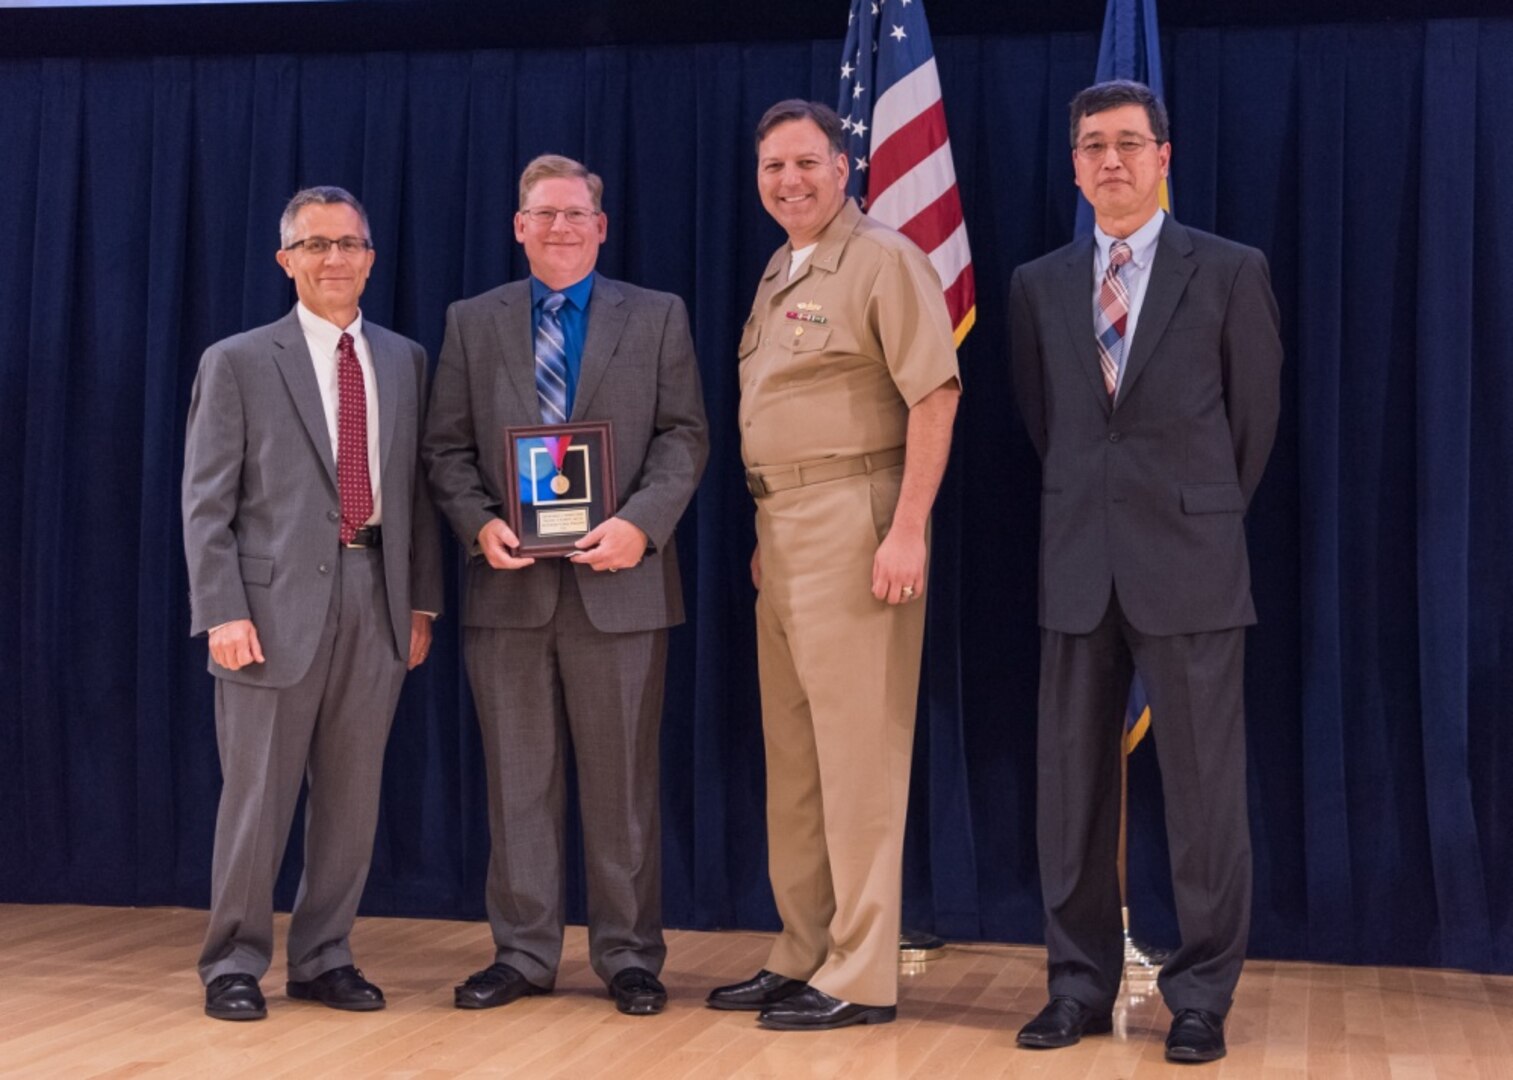 Richard Loeffler, the program manager for advanced signature guidance and training systems, receives the Capt. Harold E. Saunders Award for exemplary technical management at the Naval Surface Warfare Center, Carderock Division Honor Awards ceremony Aug. 1, 2017, in West Bethesda, Md. From left to right: Technical Director Dr. Tim Arcano, Loeffler, Commanding Officer Capt. Mark Vandroff and Ship Signatures Department Head Dr. Paul Shang. (U.S. Navy photo by Jake Cirksena/Released)